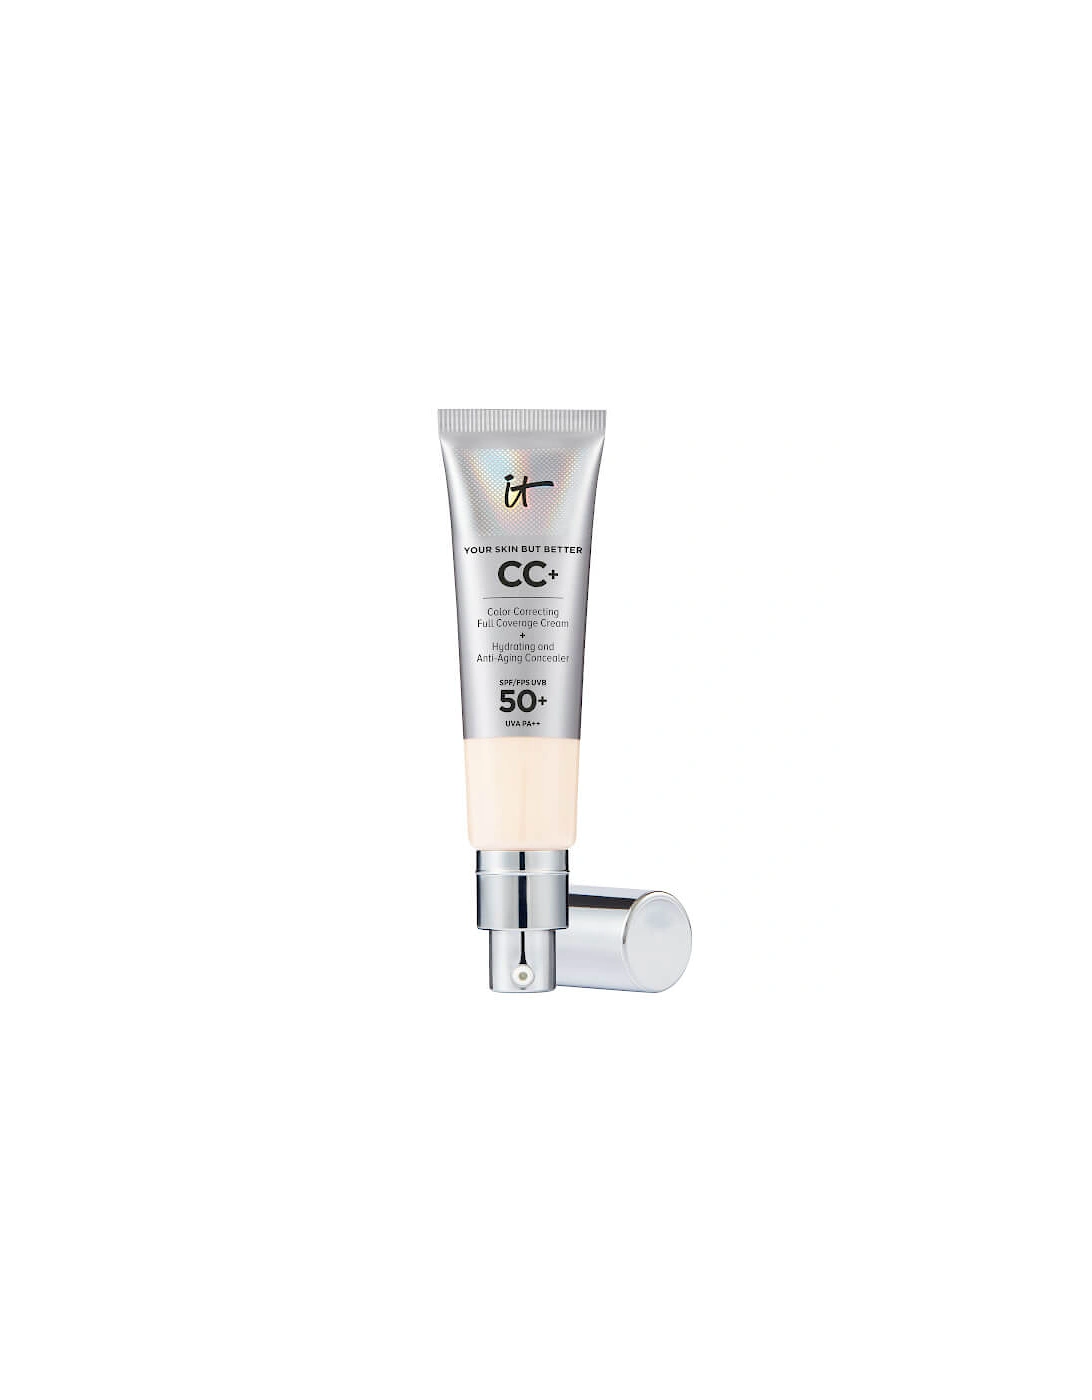 Your Skin But Better CC+ Cream with SPF50 - Fair Porcelain, 2 of 1